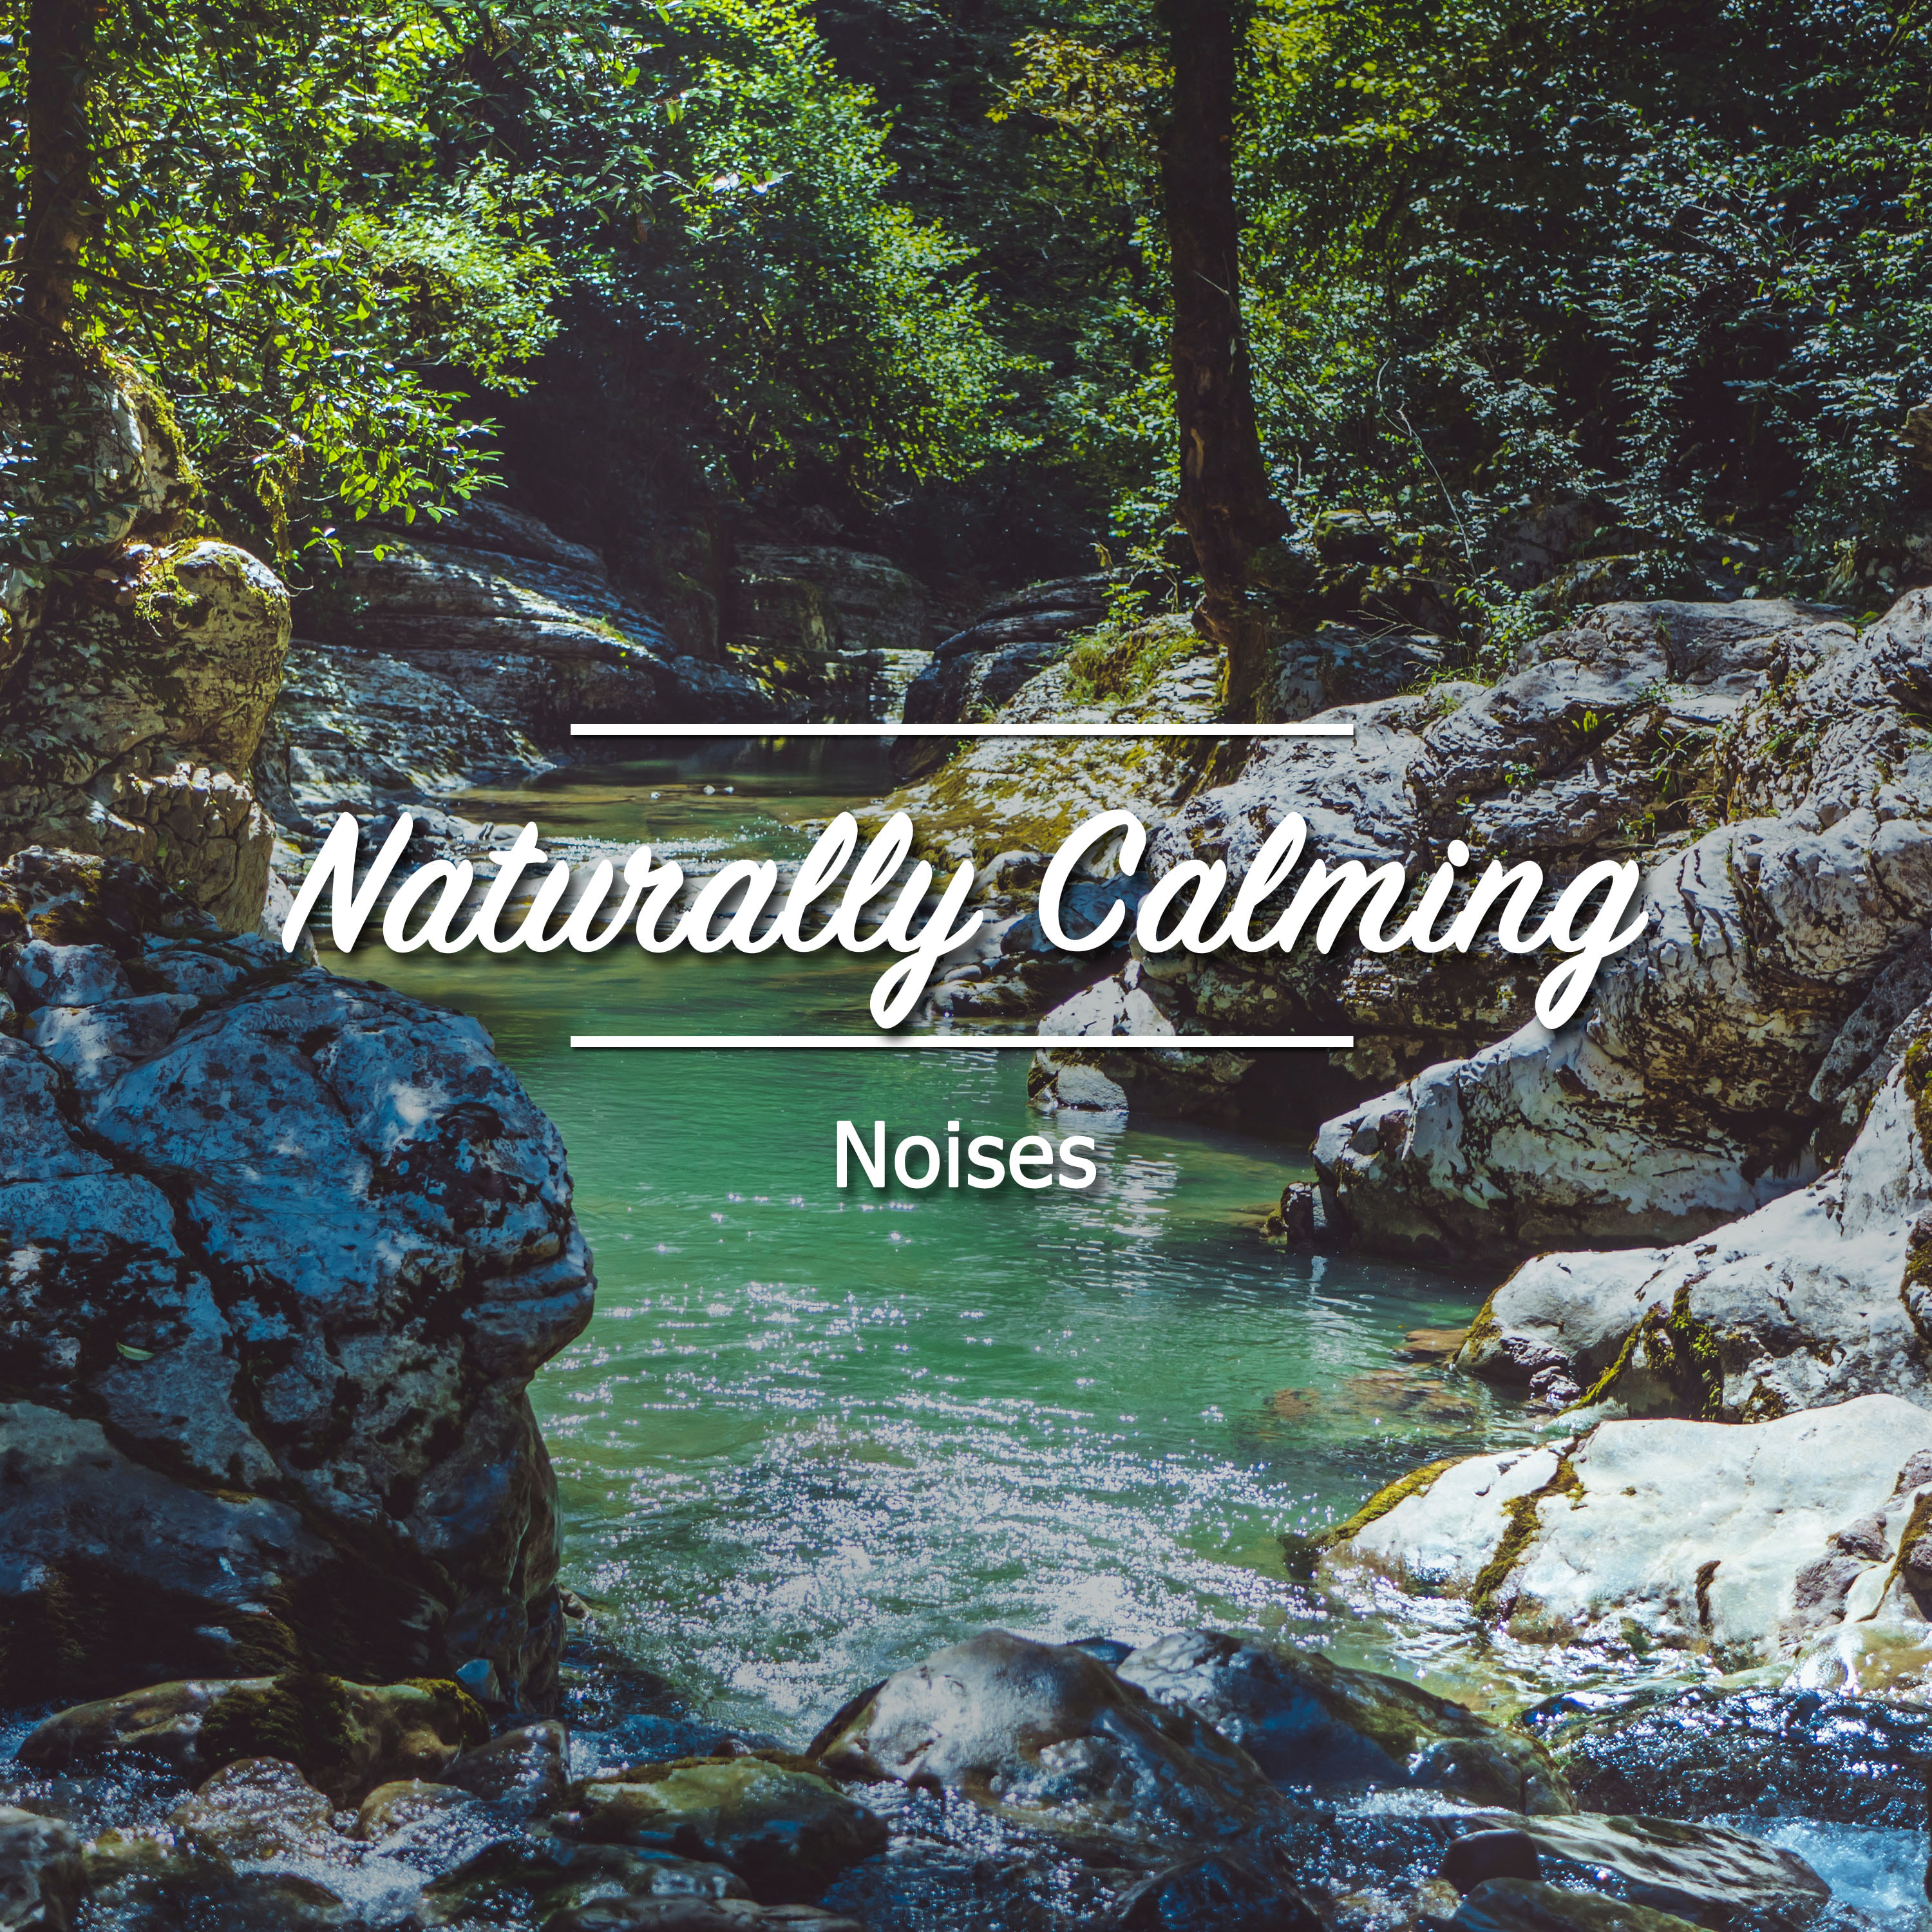 #12 Naturally Calming Noises to Promote Wellness & Heal Chakras